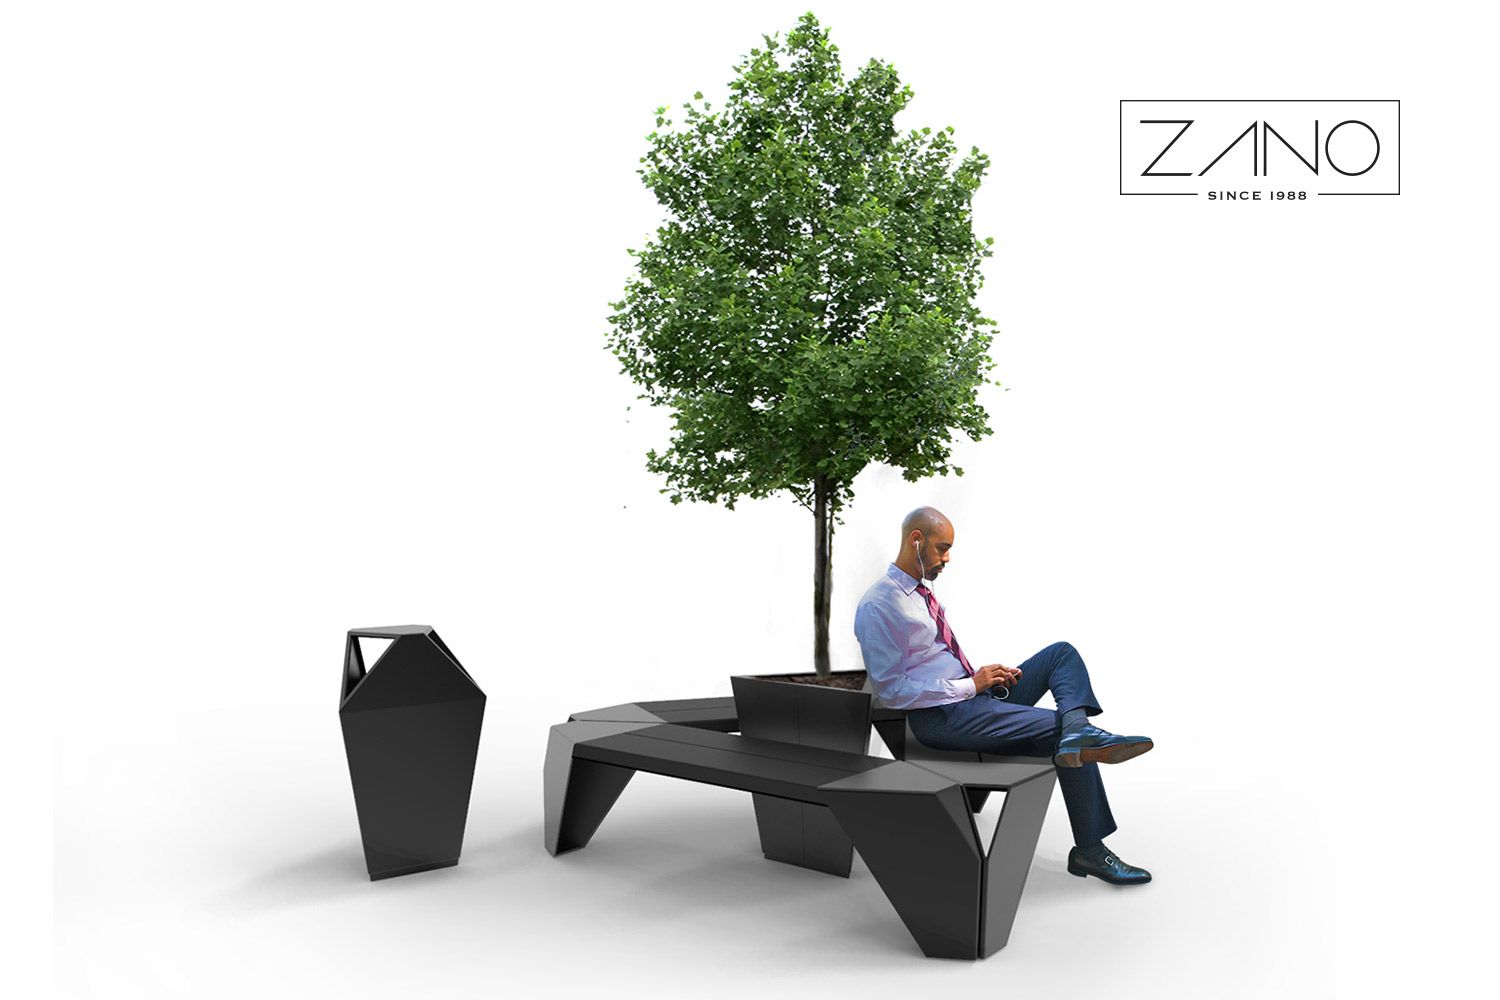 IVO benches, litter bins and planters by ZANO Street Furniture